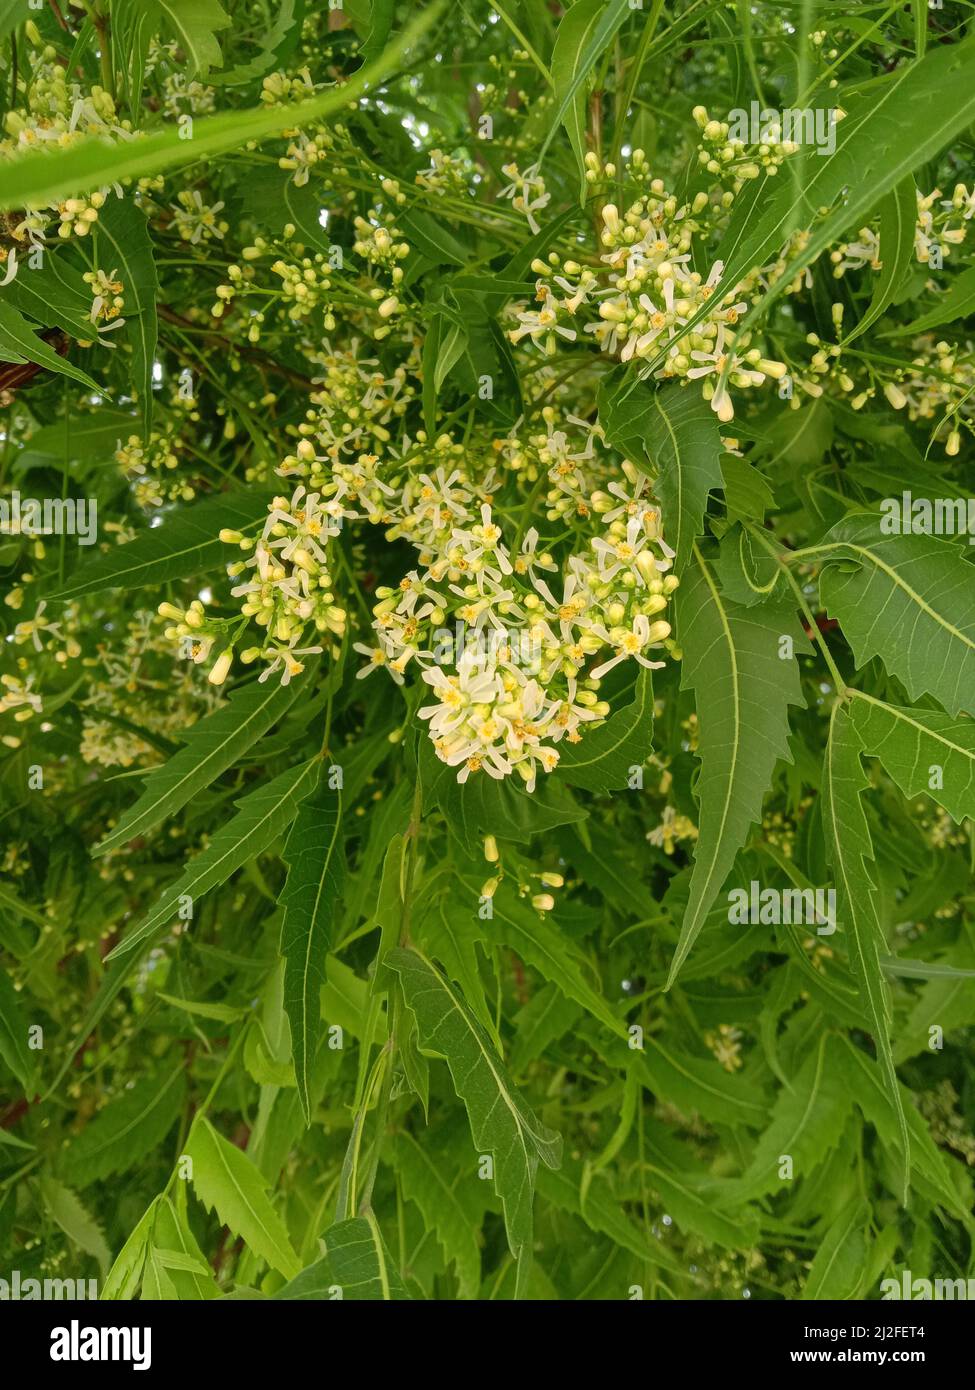 medicinal herb Azadirachta indica flower and leaves Stock Photo